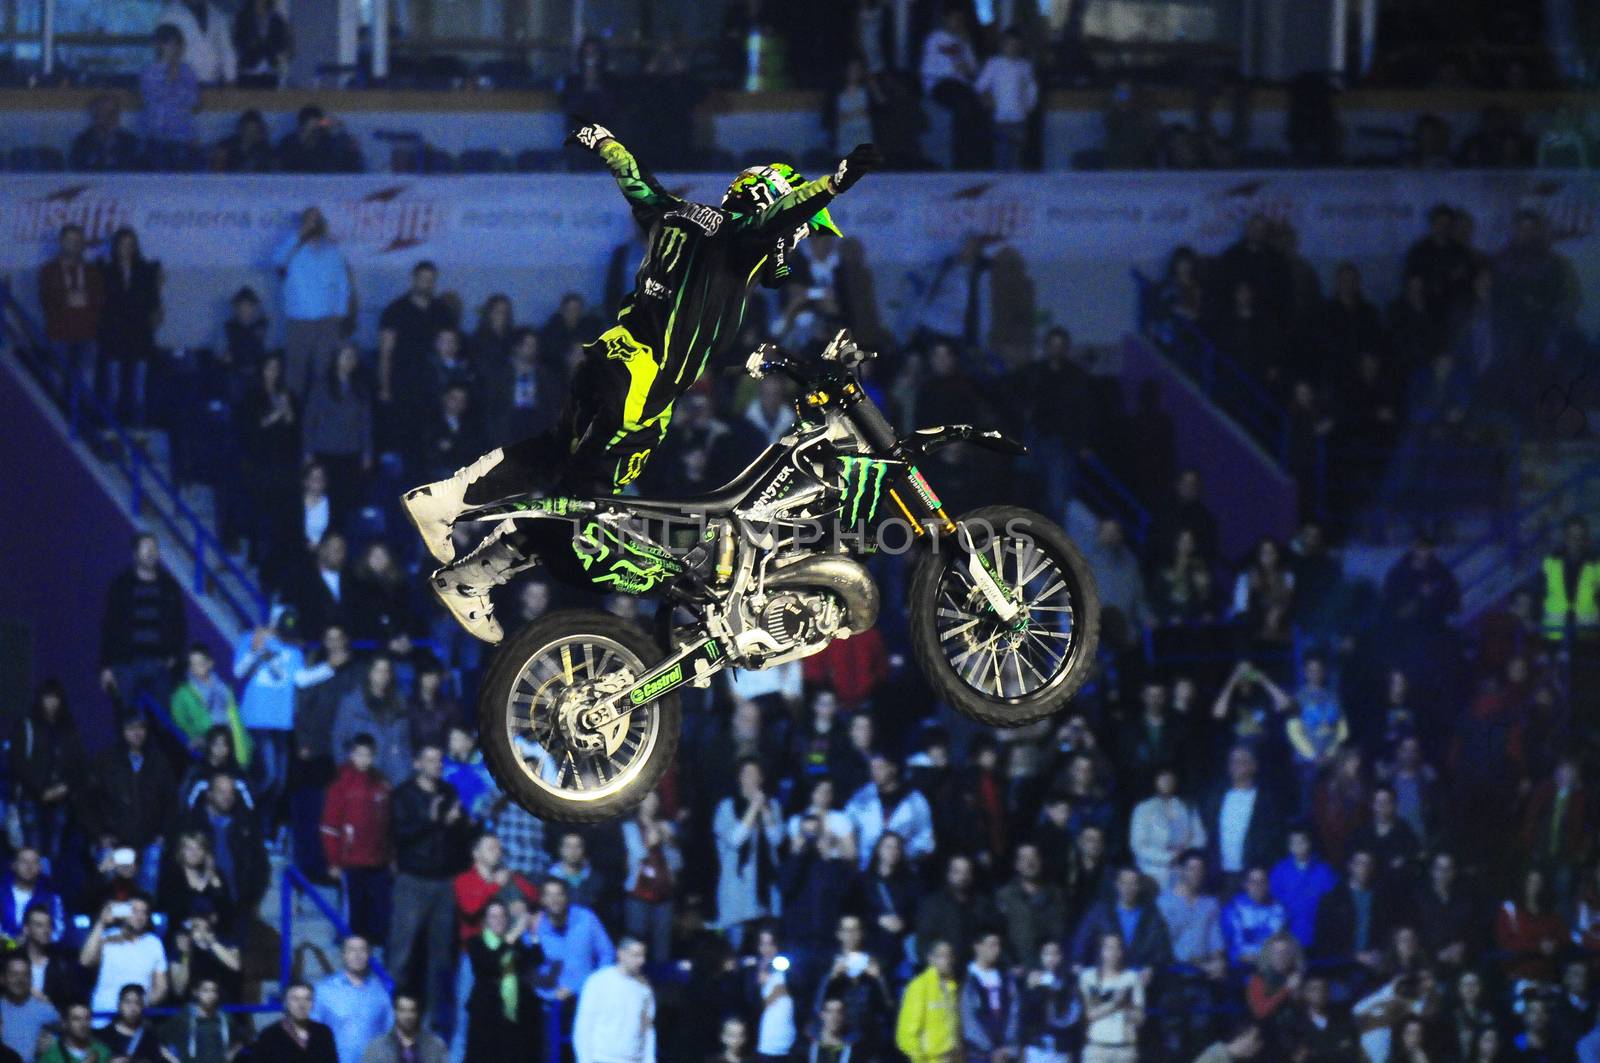 SERBIA, BELGRADE - APRIL 26, 2012: Bike rider performing the trick at Masters of dirt show, most thrilling and spectacular freestyle motocross show